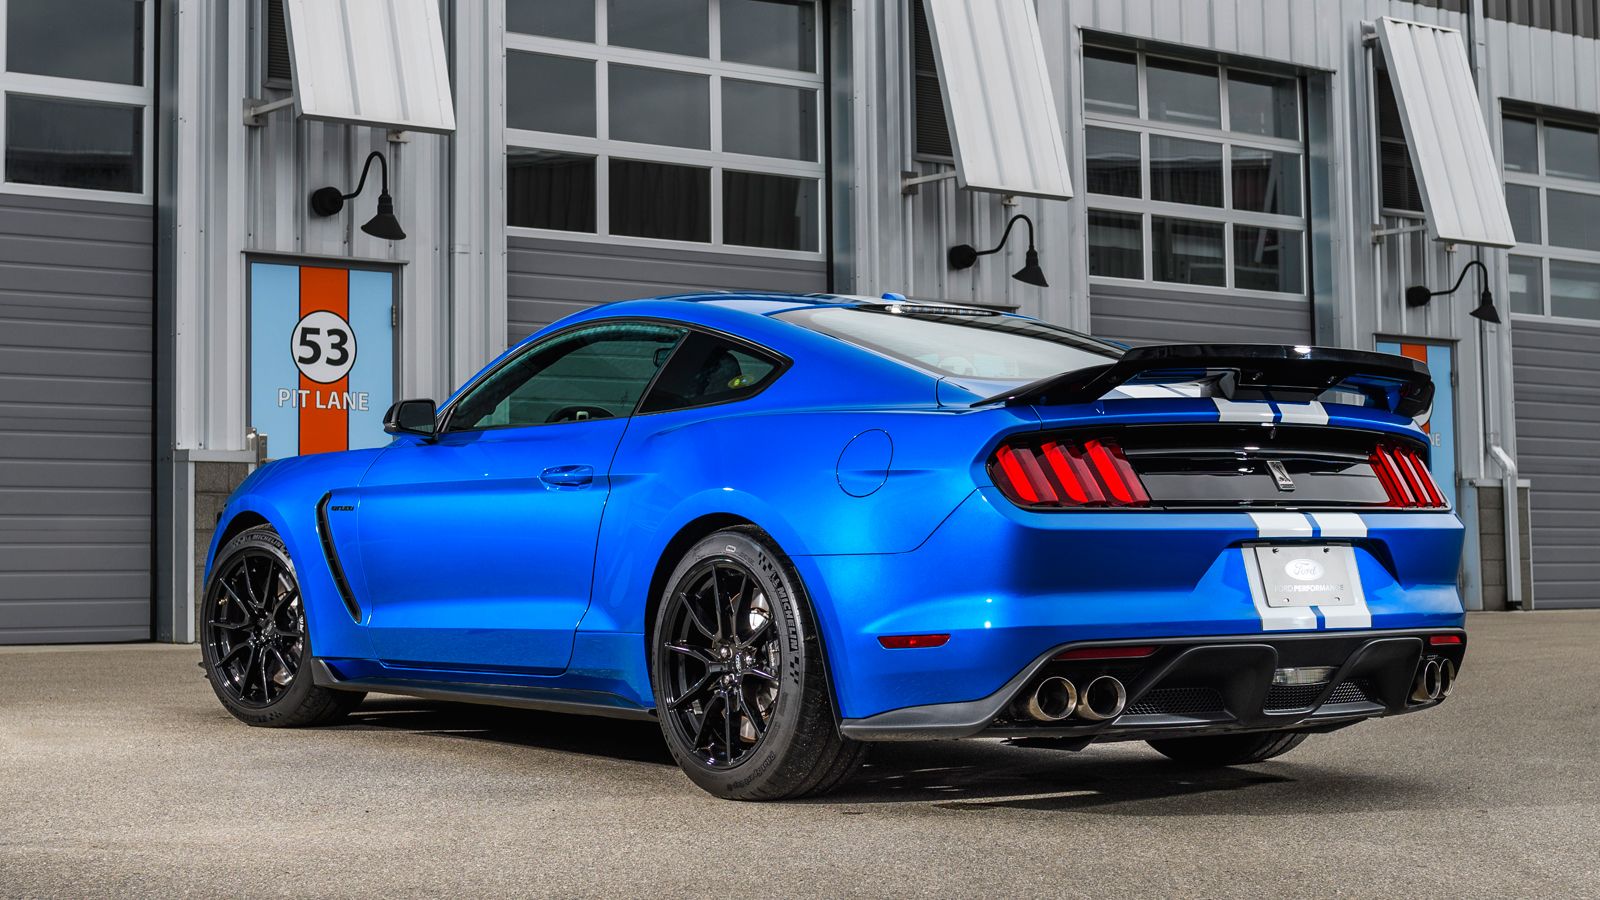 2019 Ford Mustang Shelby GT350 first drive: The top pony, for now